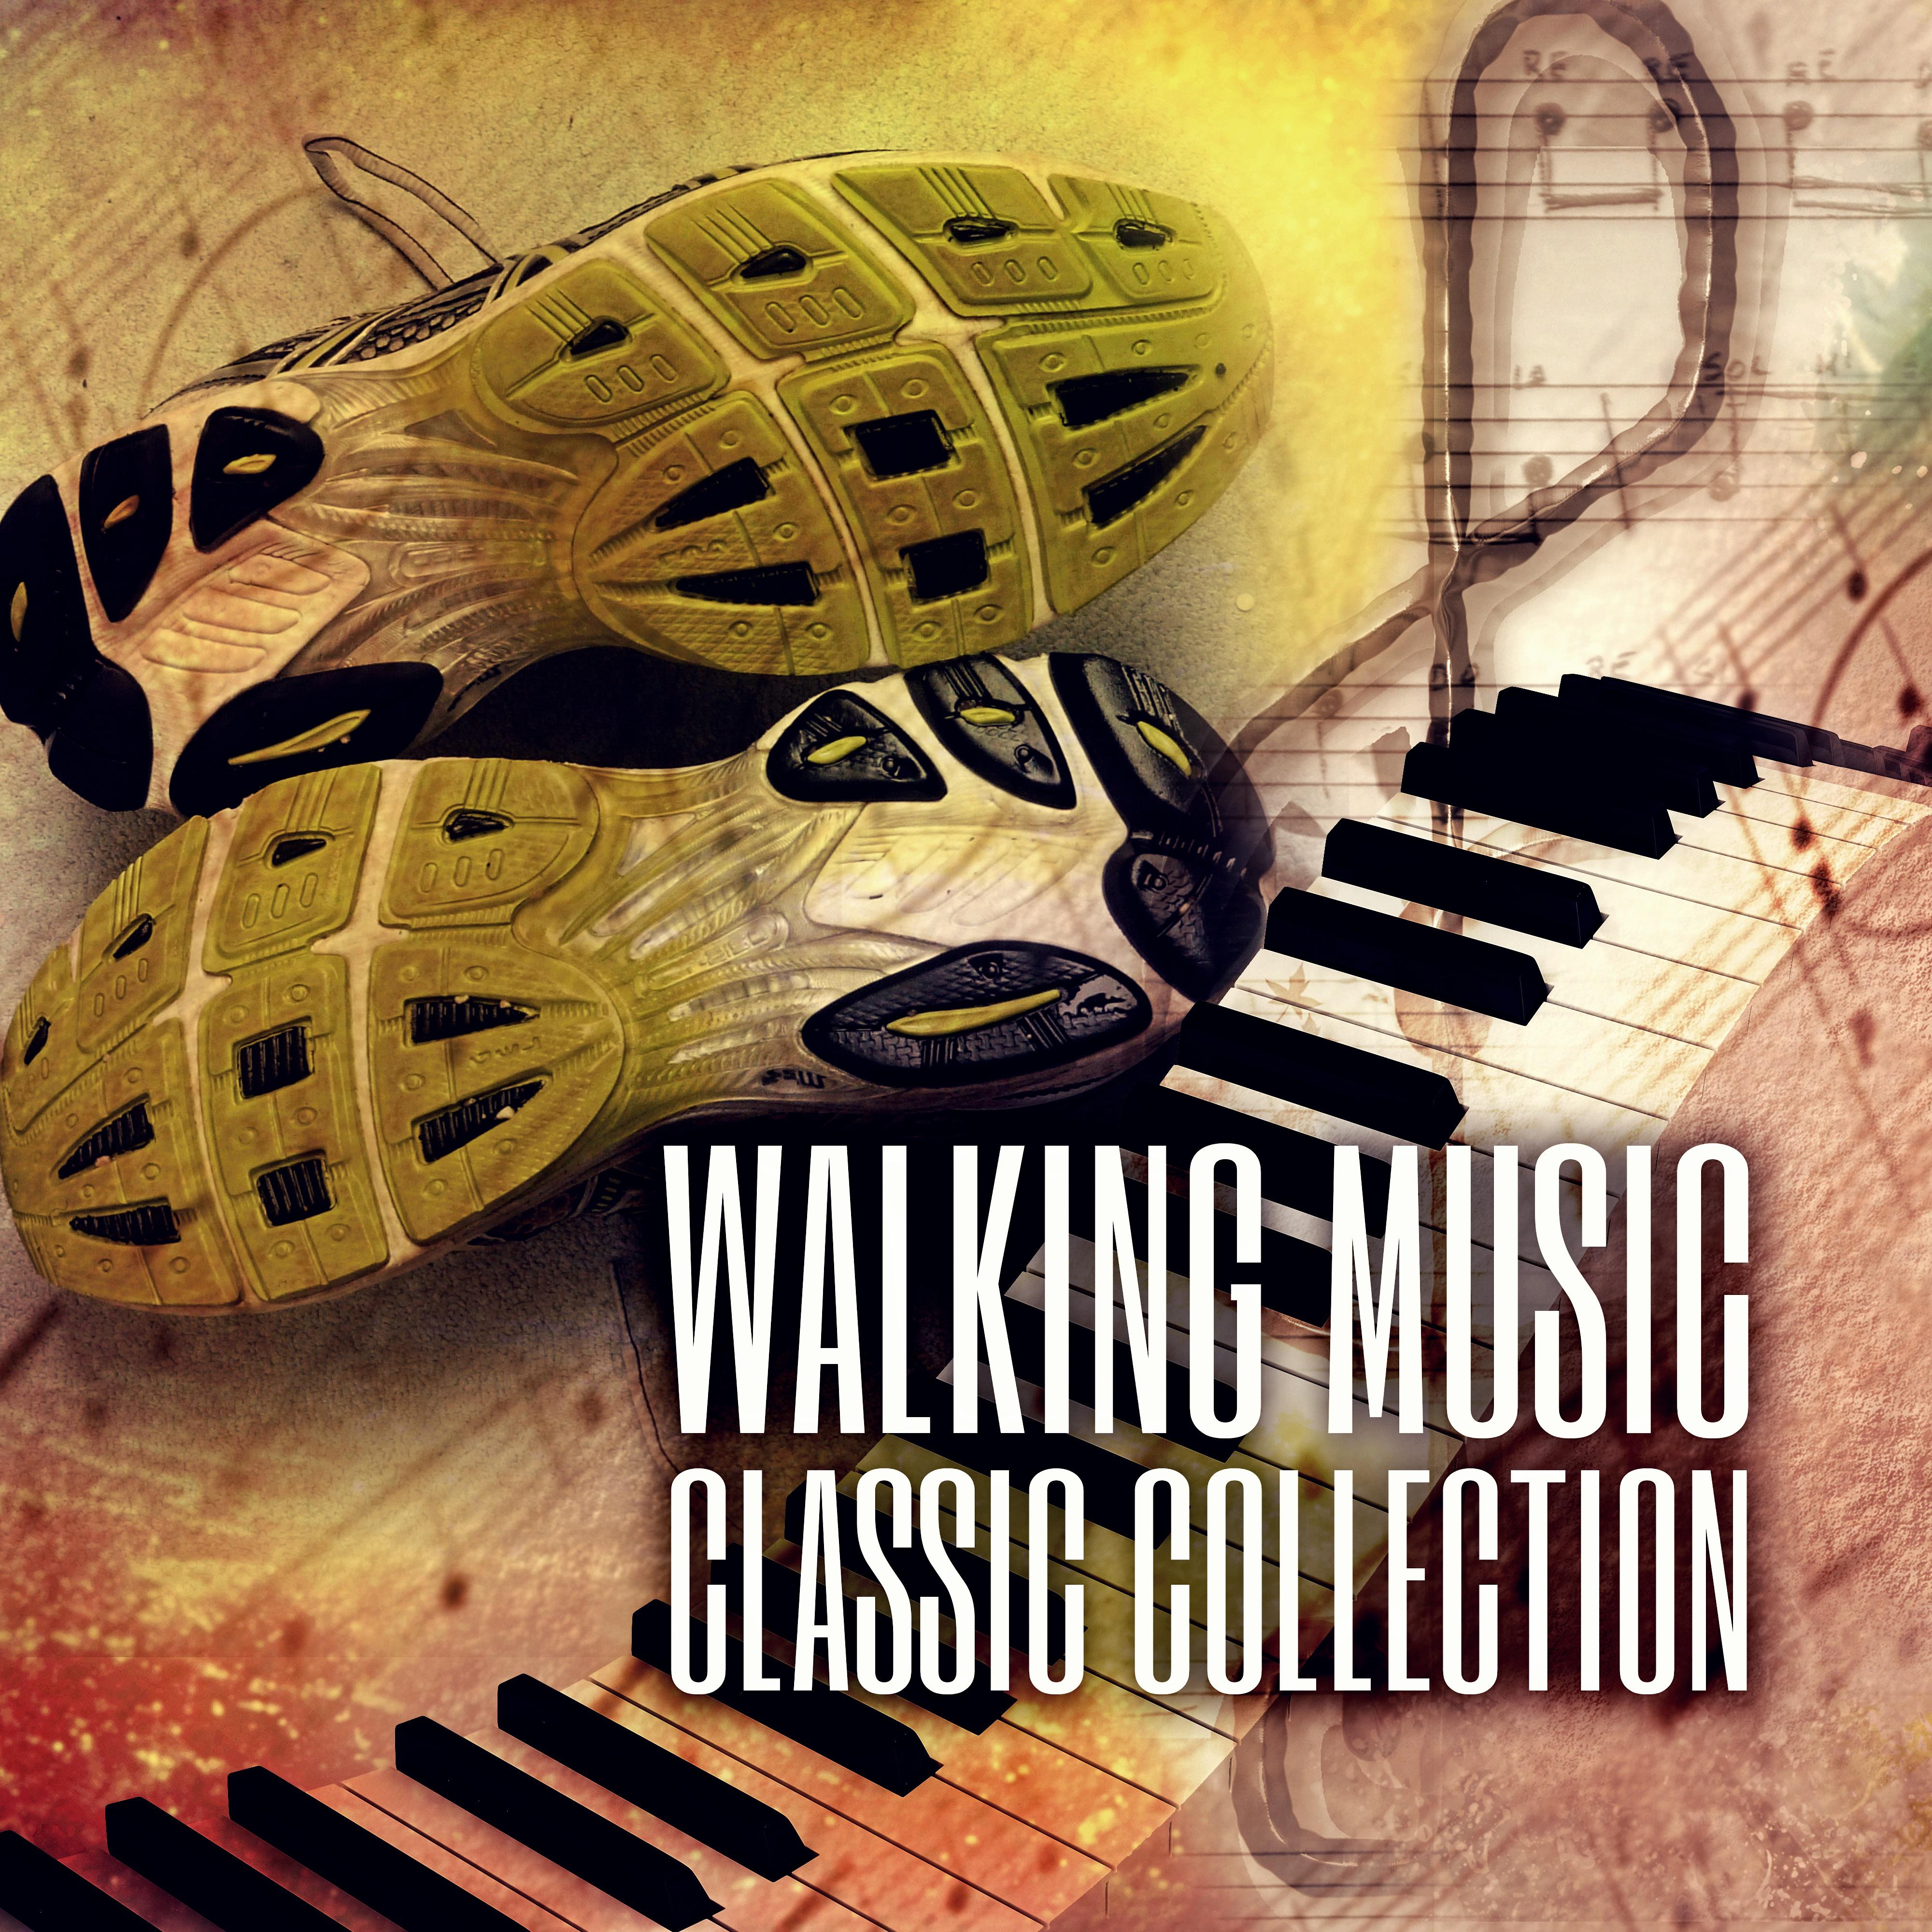 Walking Music Classic Music Collection  Amazing Pieces of Classical Music for Walking and Running, Classical Relaxing Music Edition